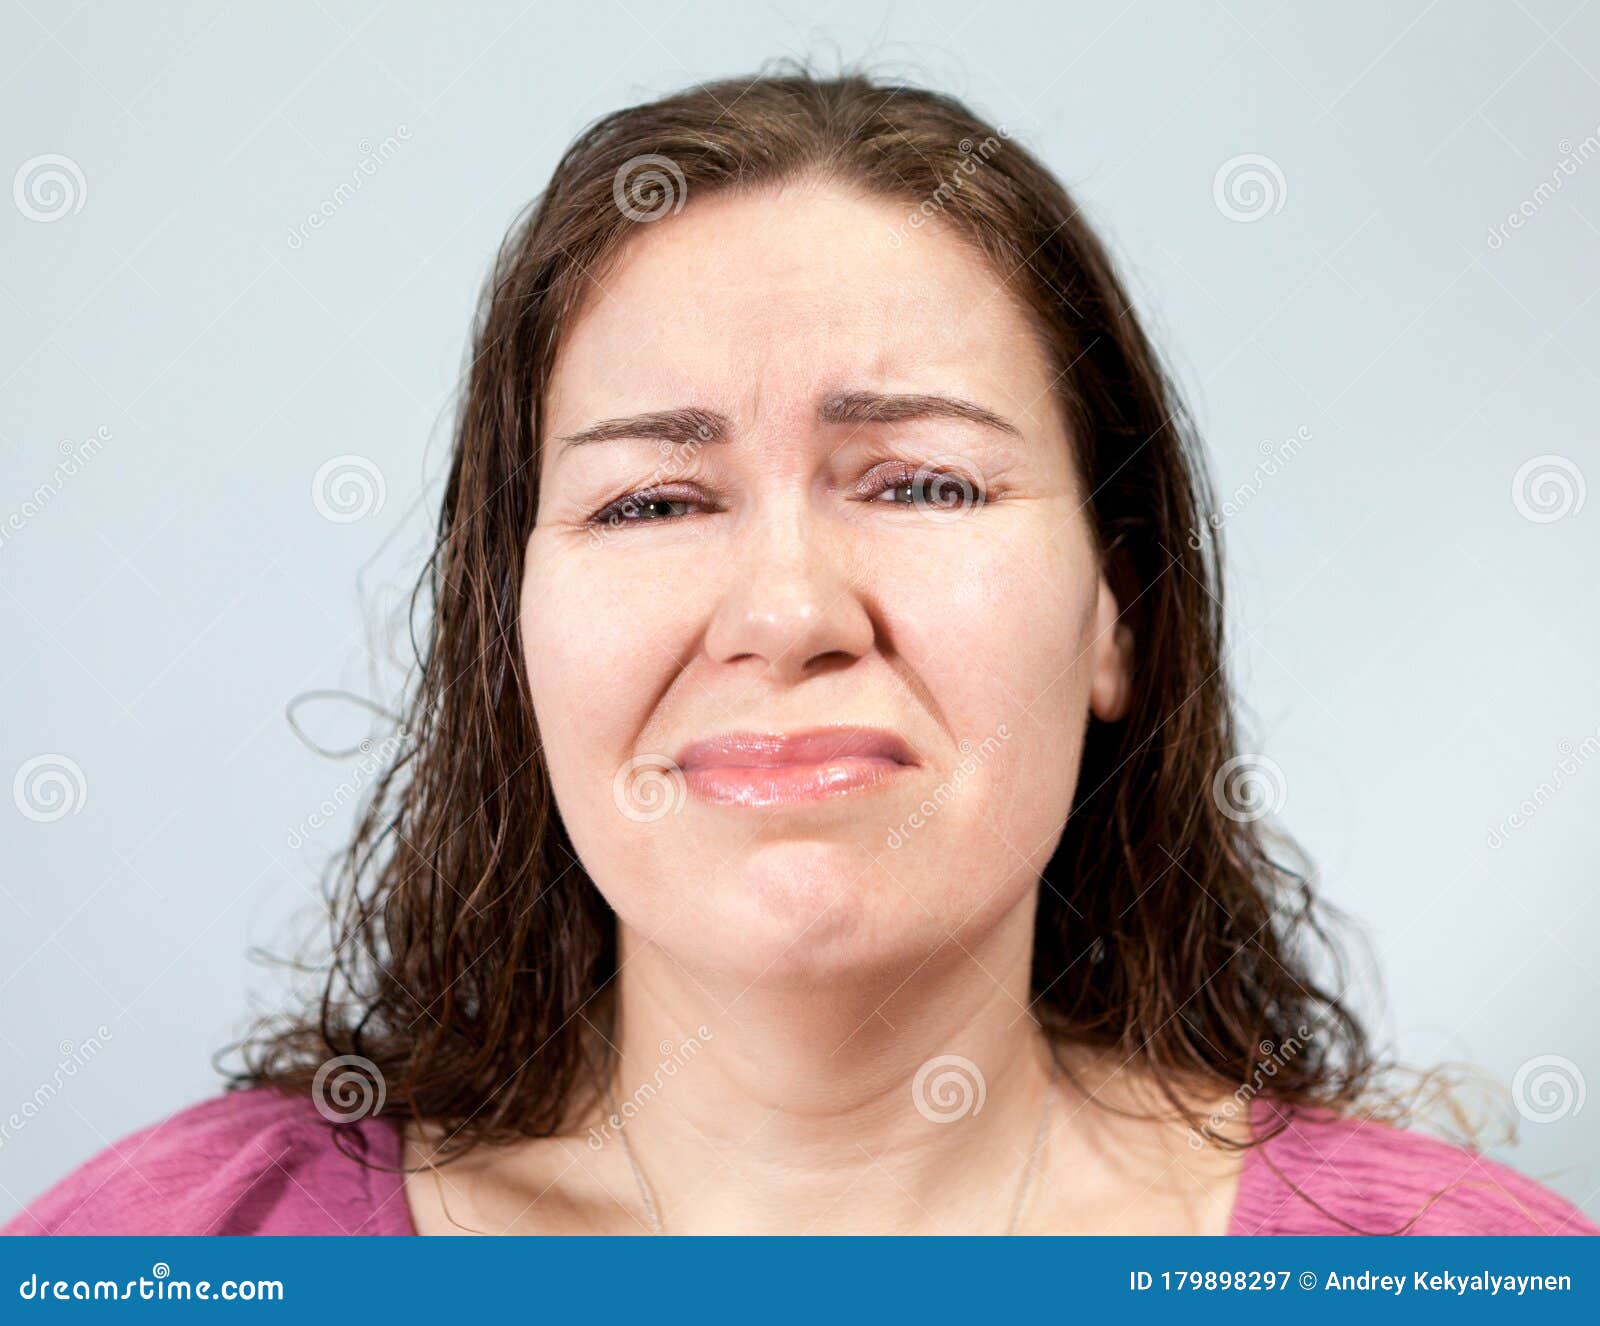 Emotions. A Series Of Photos Where A Young Woman With A Disgruntled